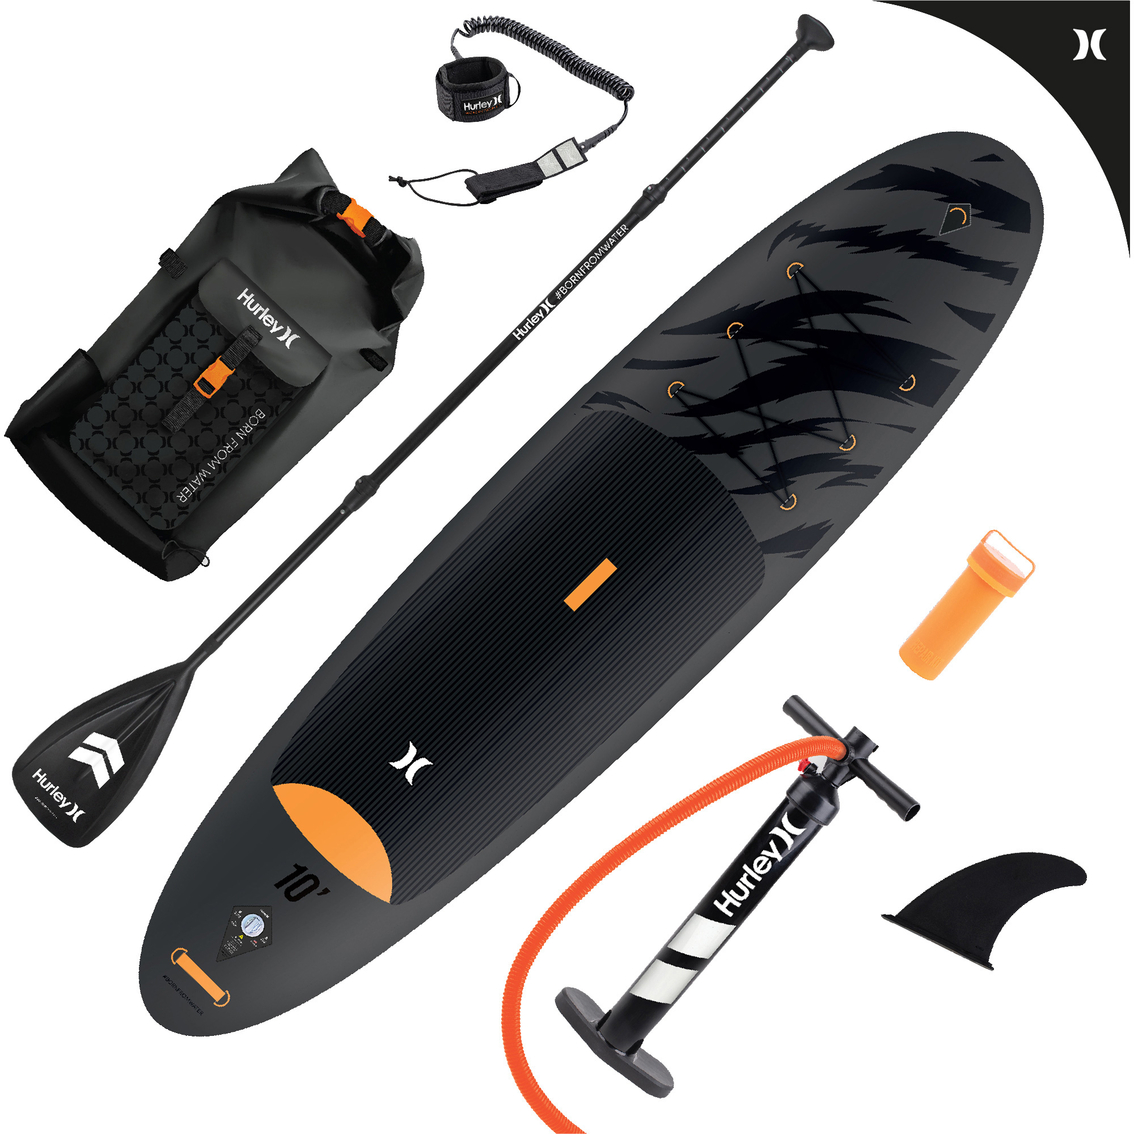 Hurley Advantage 10 ft. Stand Up Paddle Board with Hikeable Backpack - Image 6 of 7